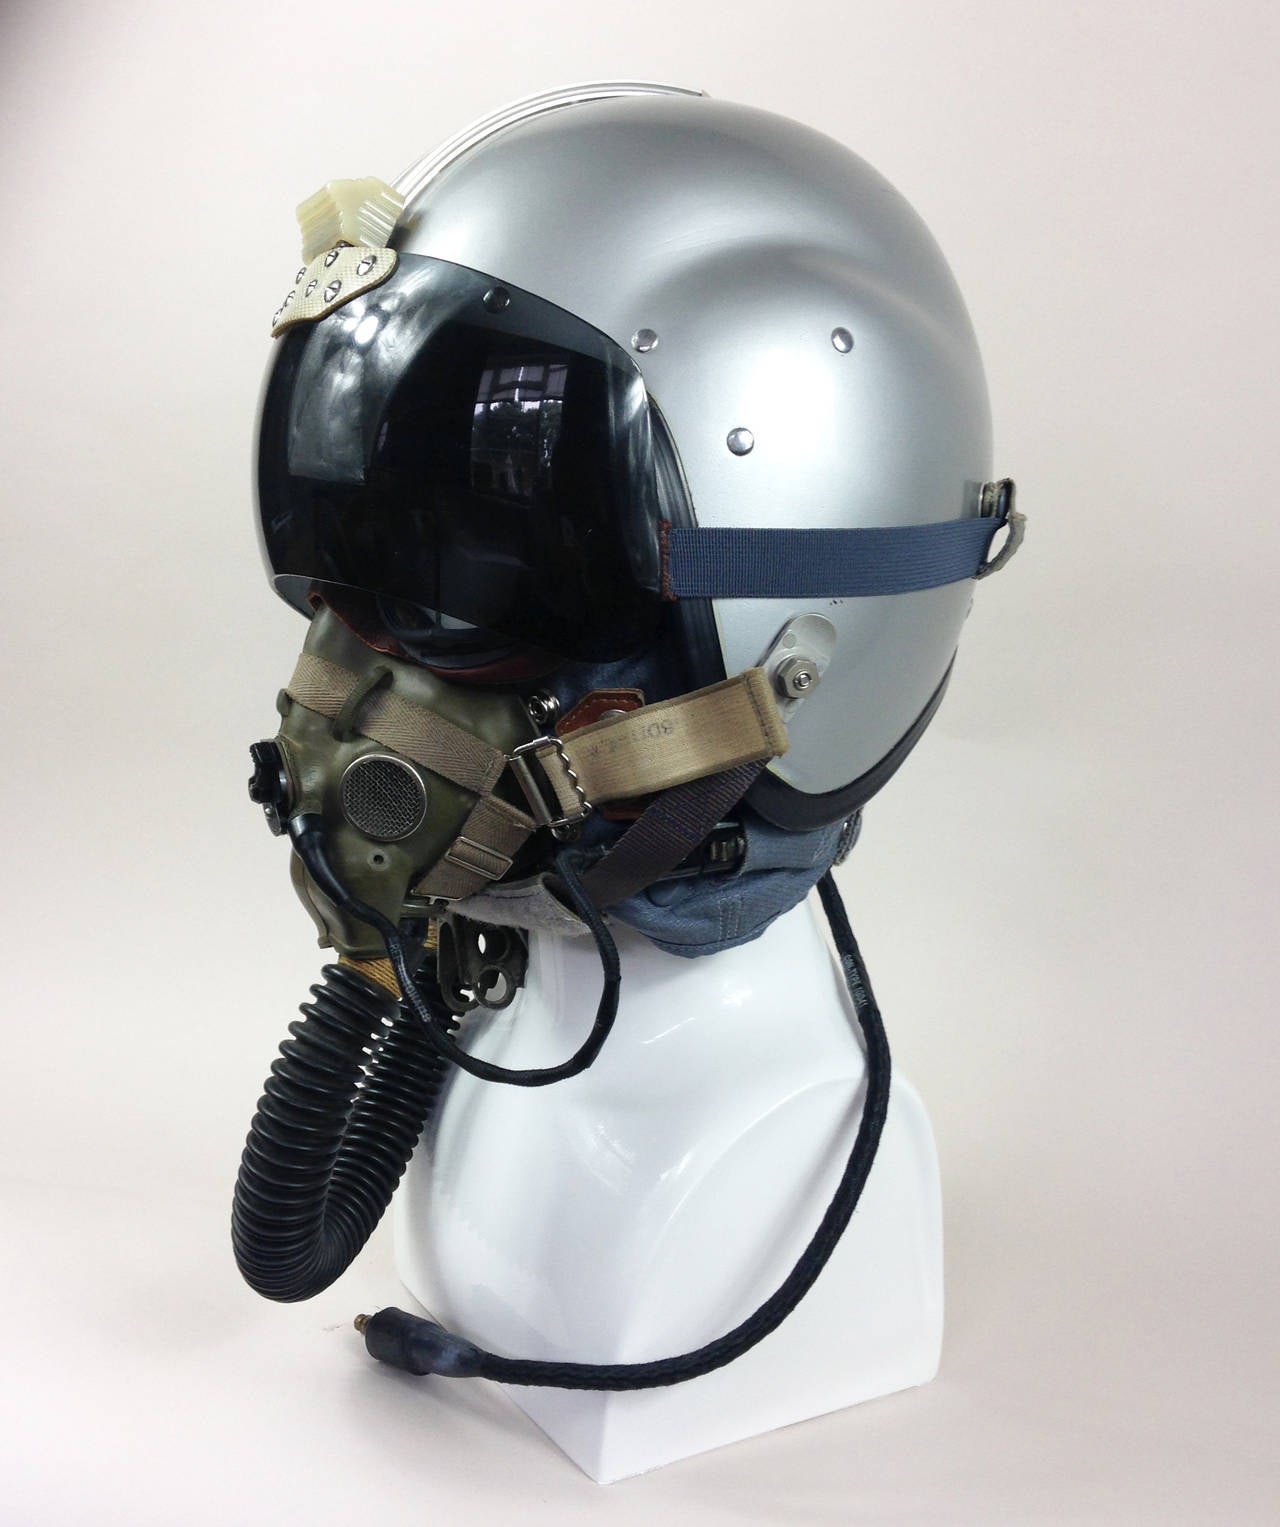 Great Britain (UK) Early Jet Age Pilot's Head Set of the Royal Air Force